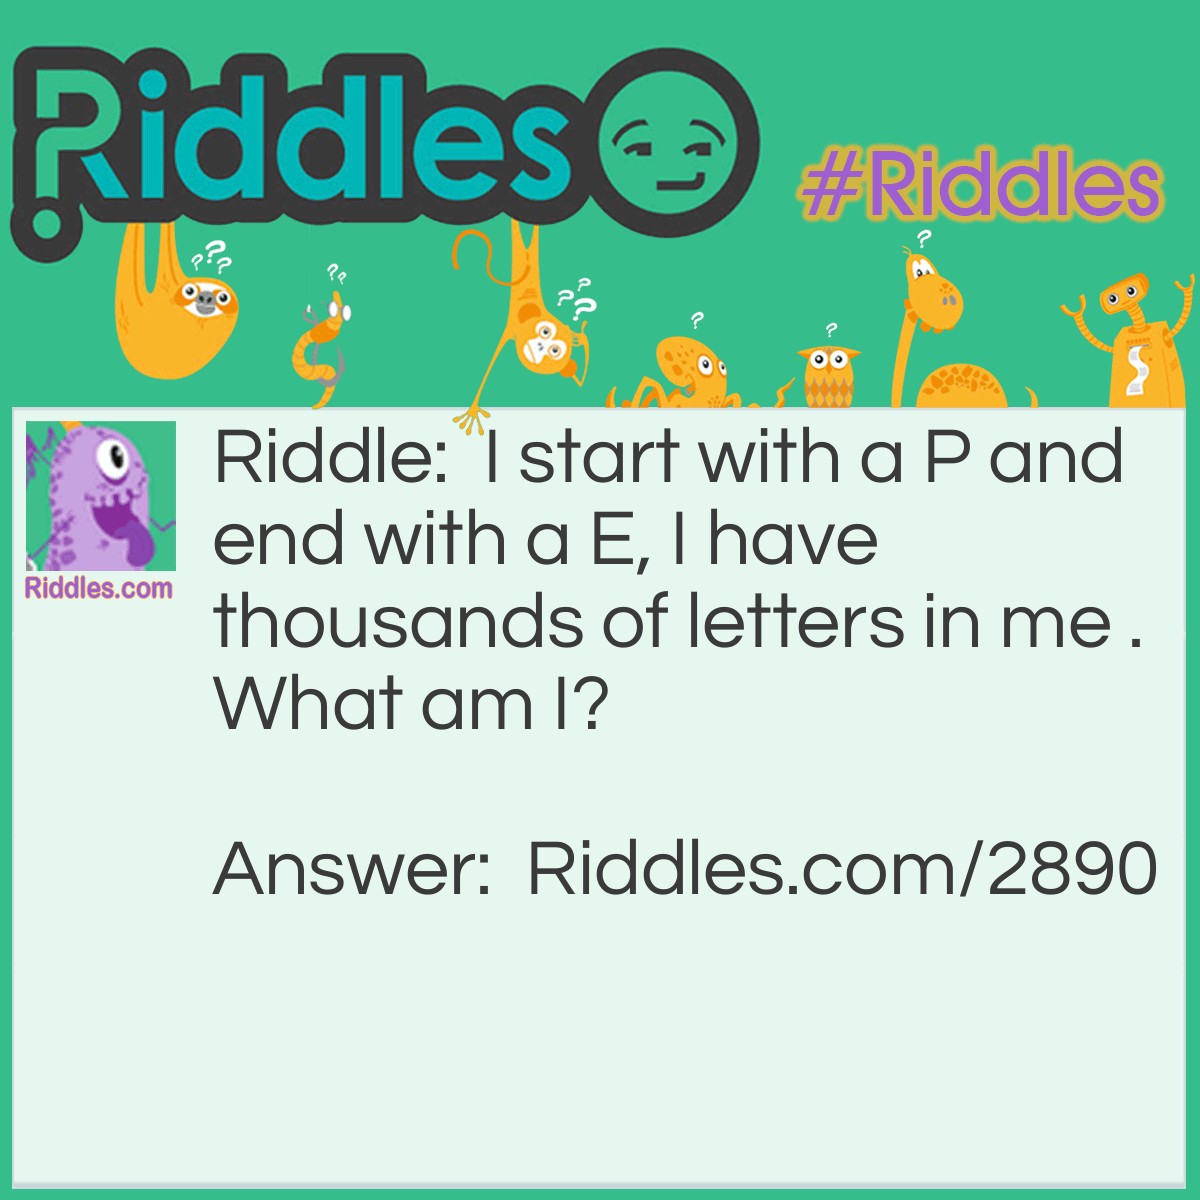 Riddle: I start with a P and end with a E, I have thousands of letters in me . What am I? Answer: A post office.